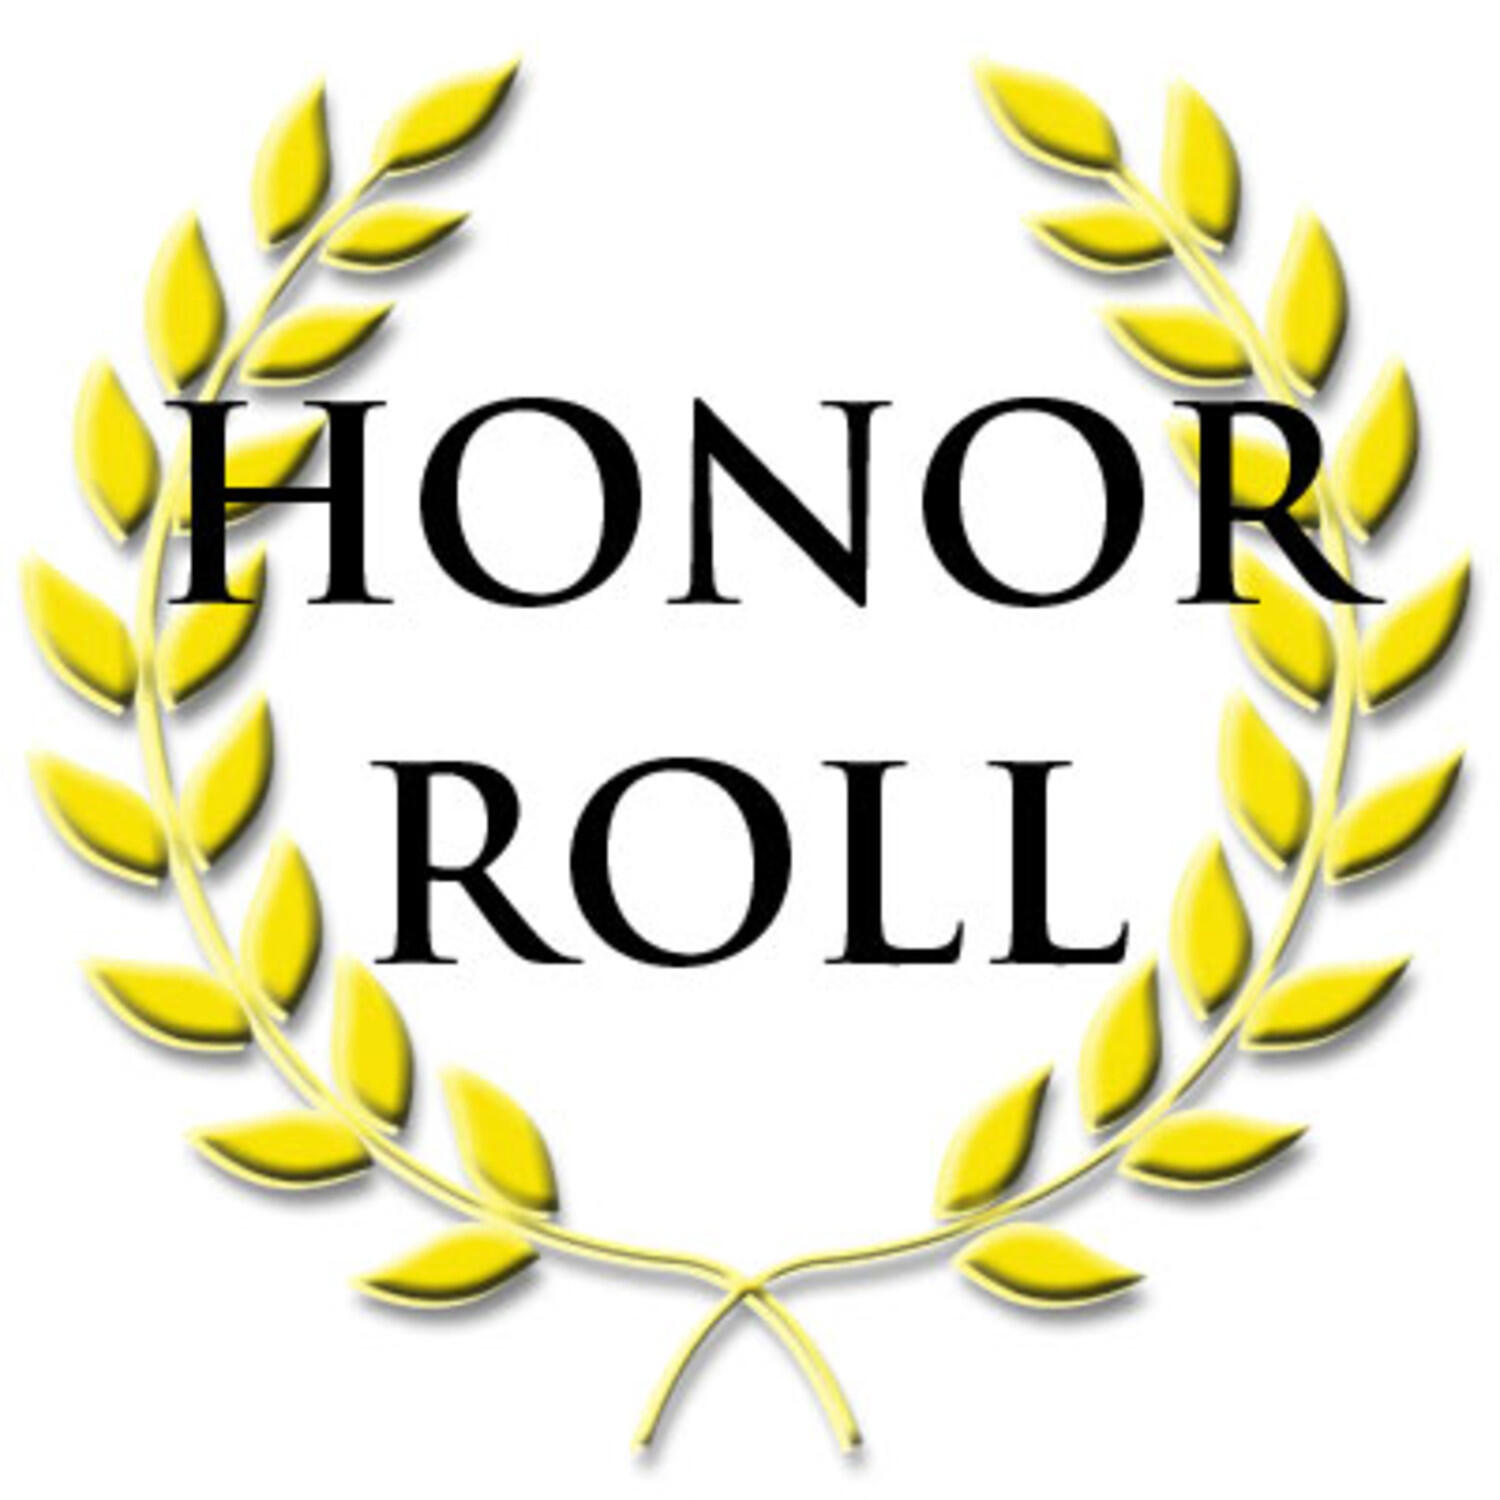 List of this quarter's honor roll students